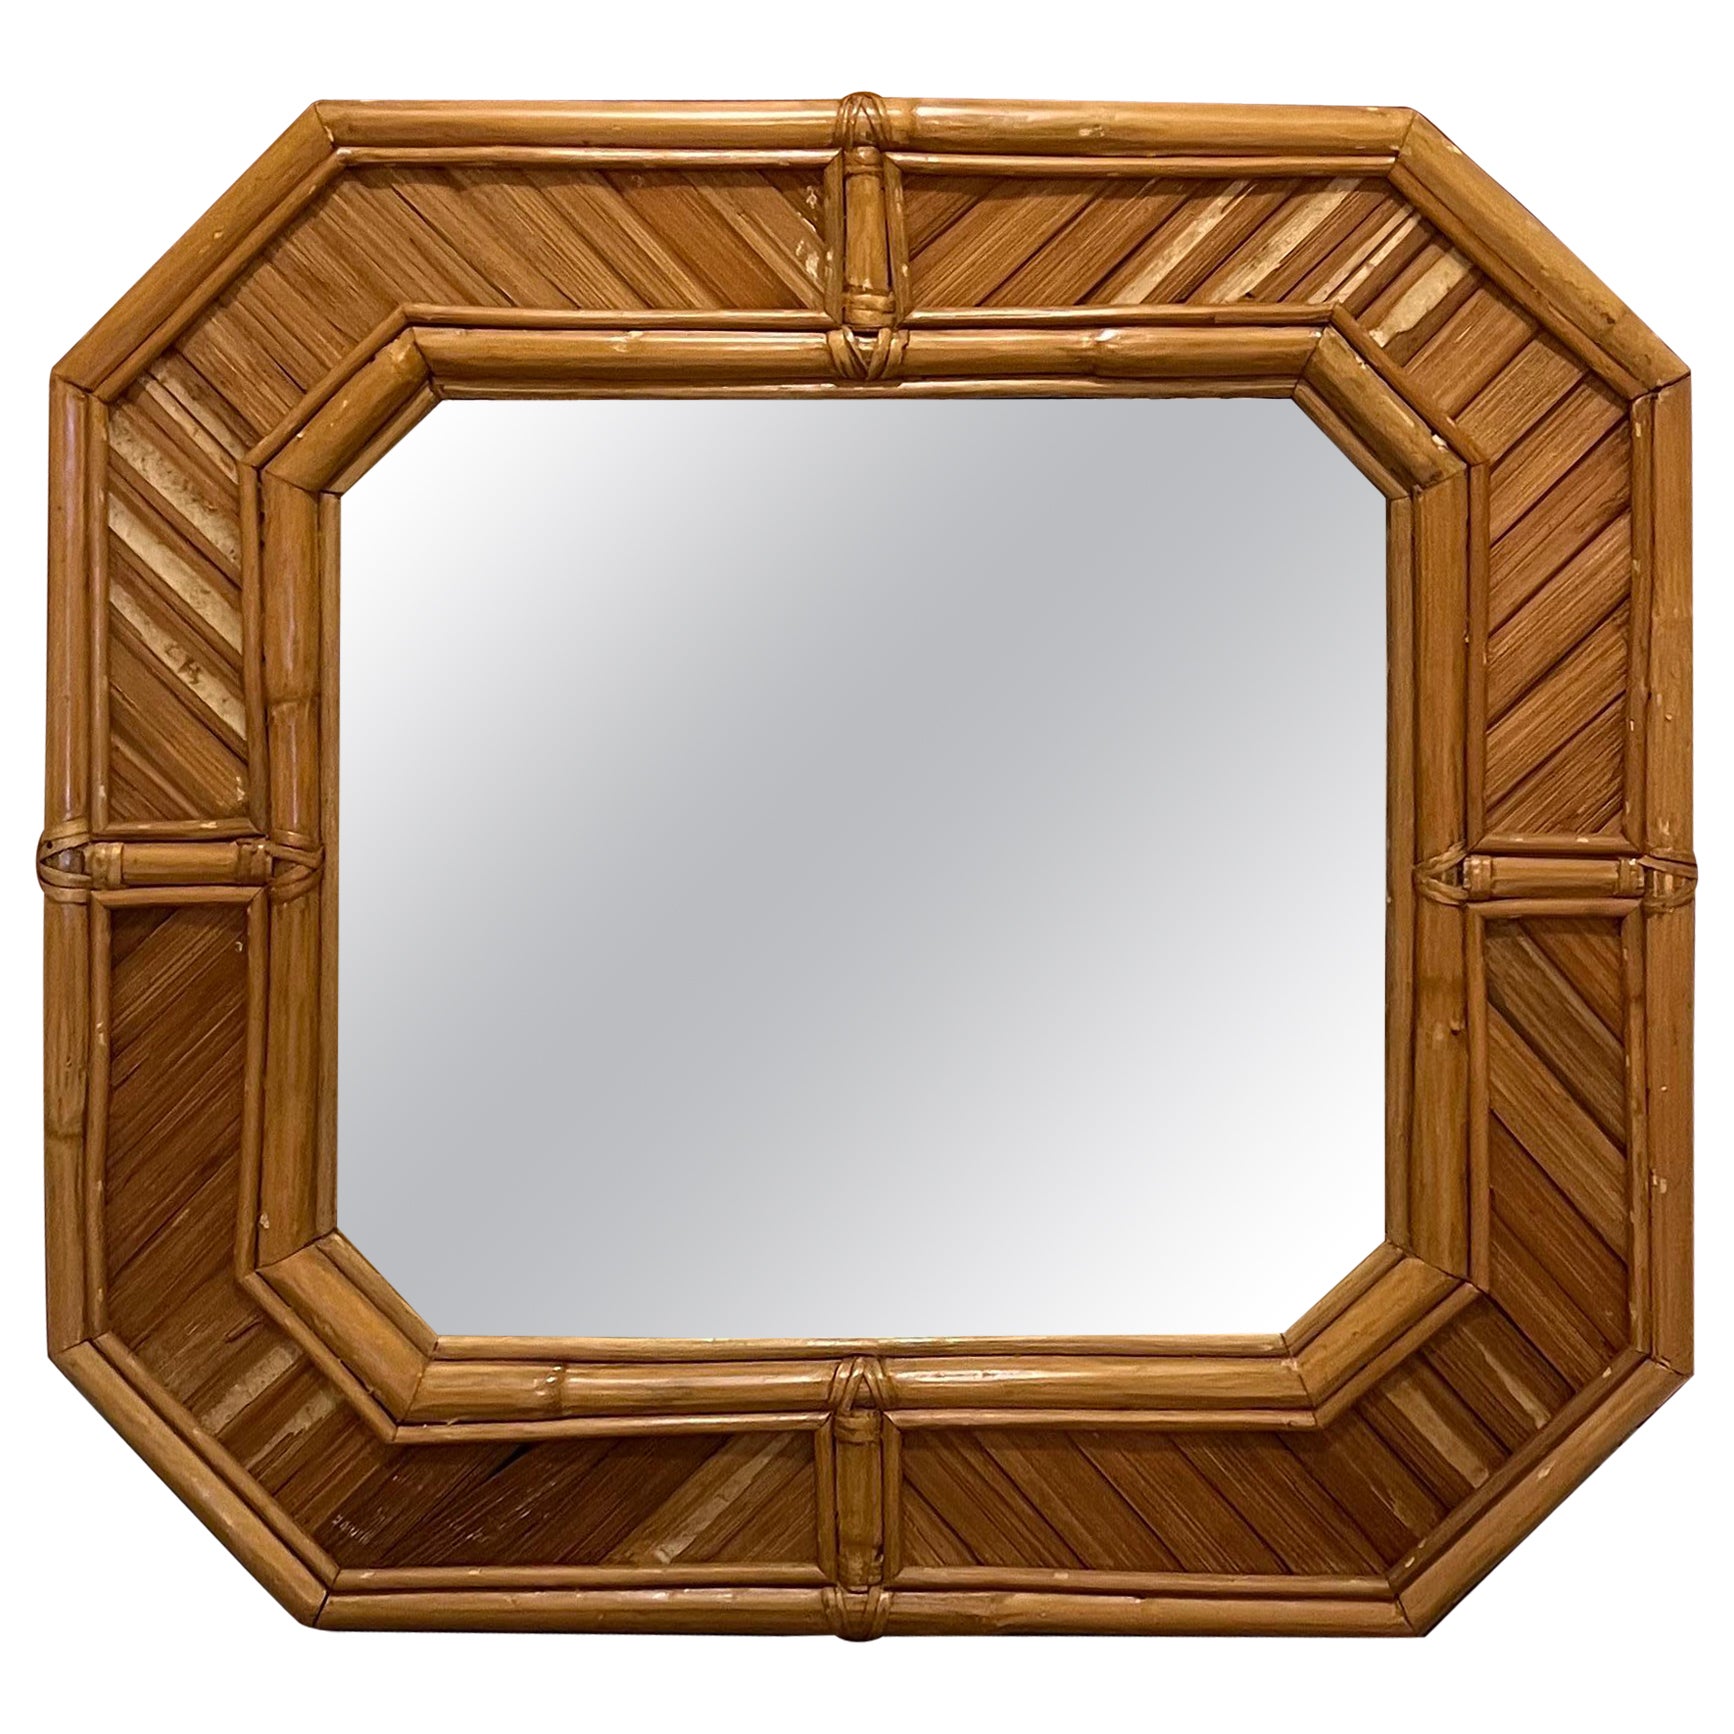 Rounded Square Bamboo Mirror